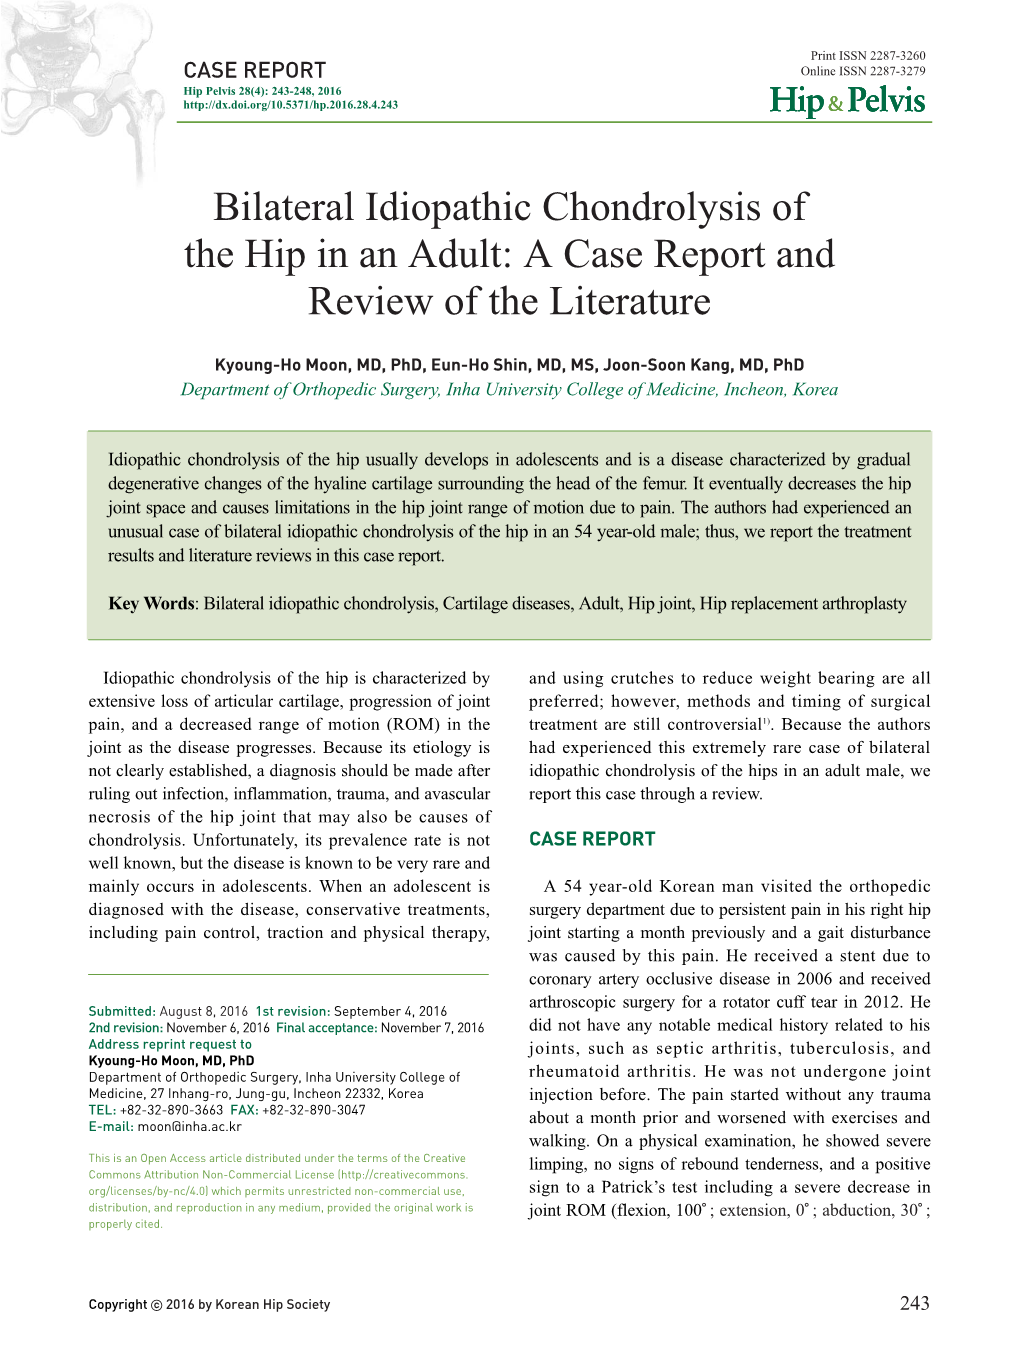 Bilateral Idiopathic Chondrolysis of the Hip in an Adult: a Case Report and Review of the Literature